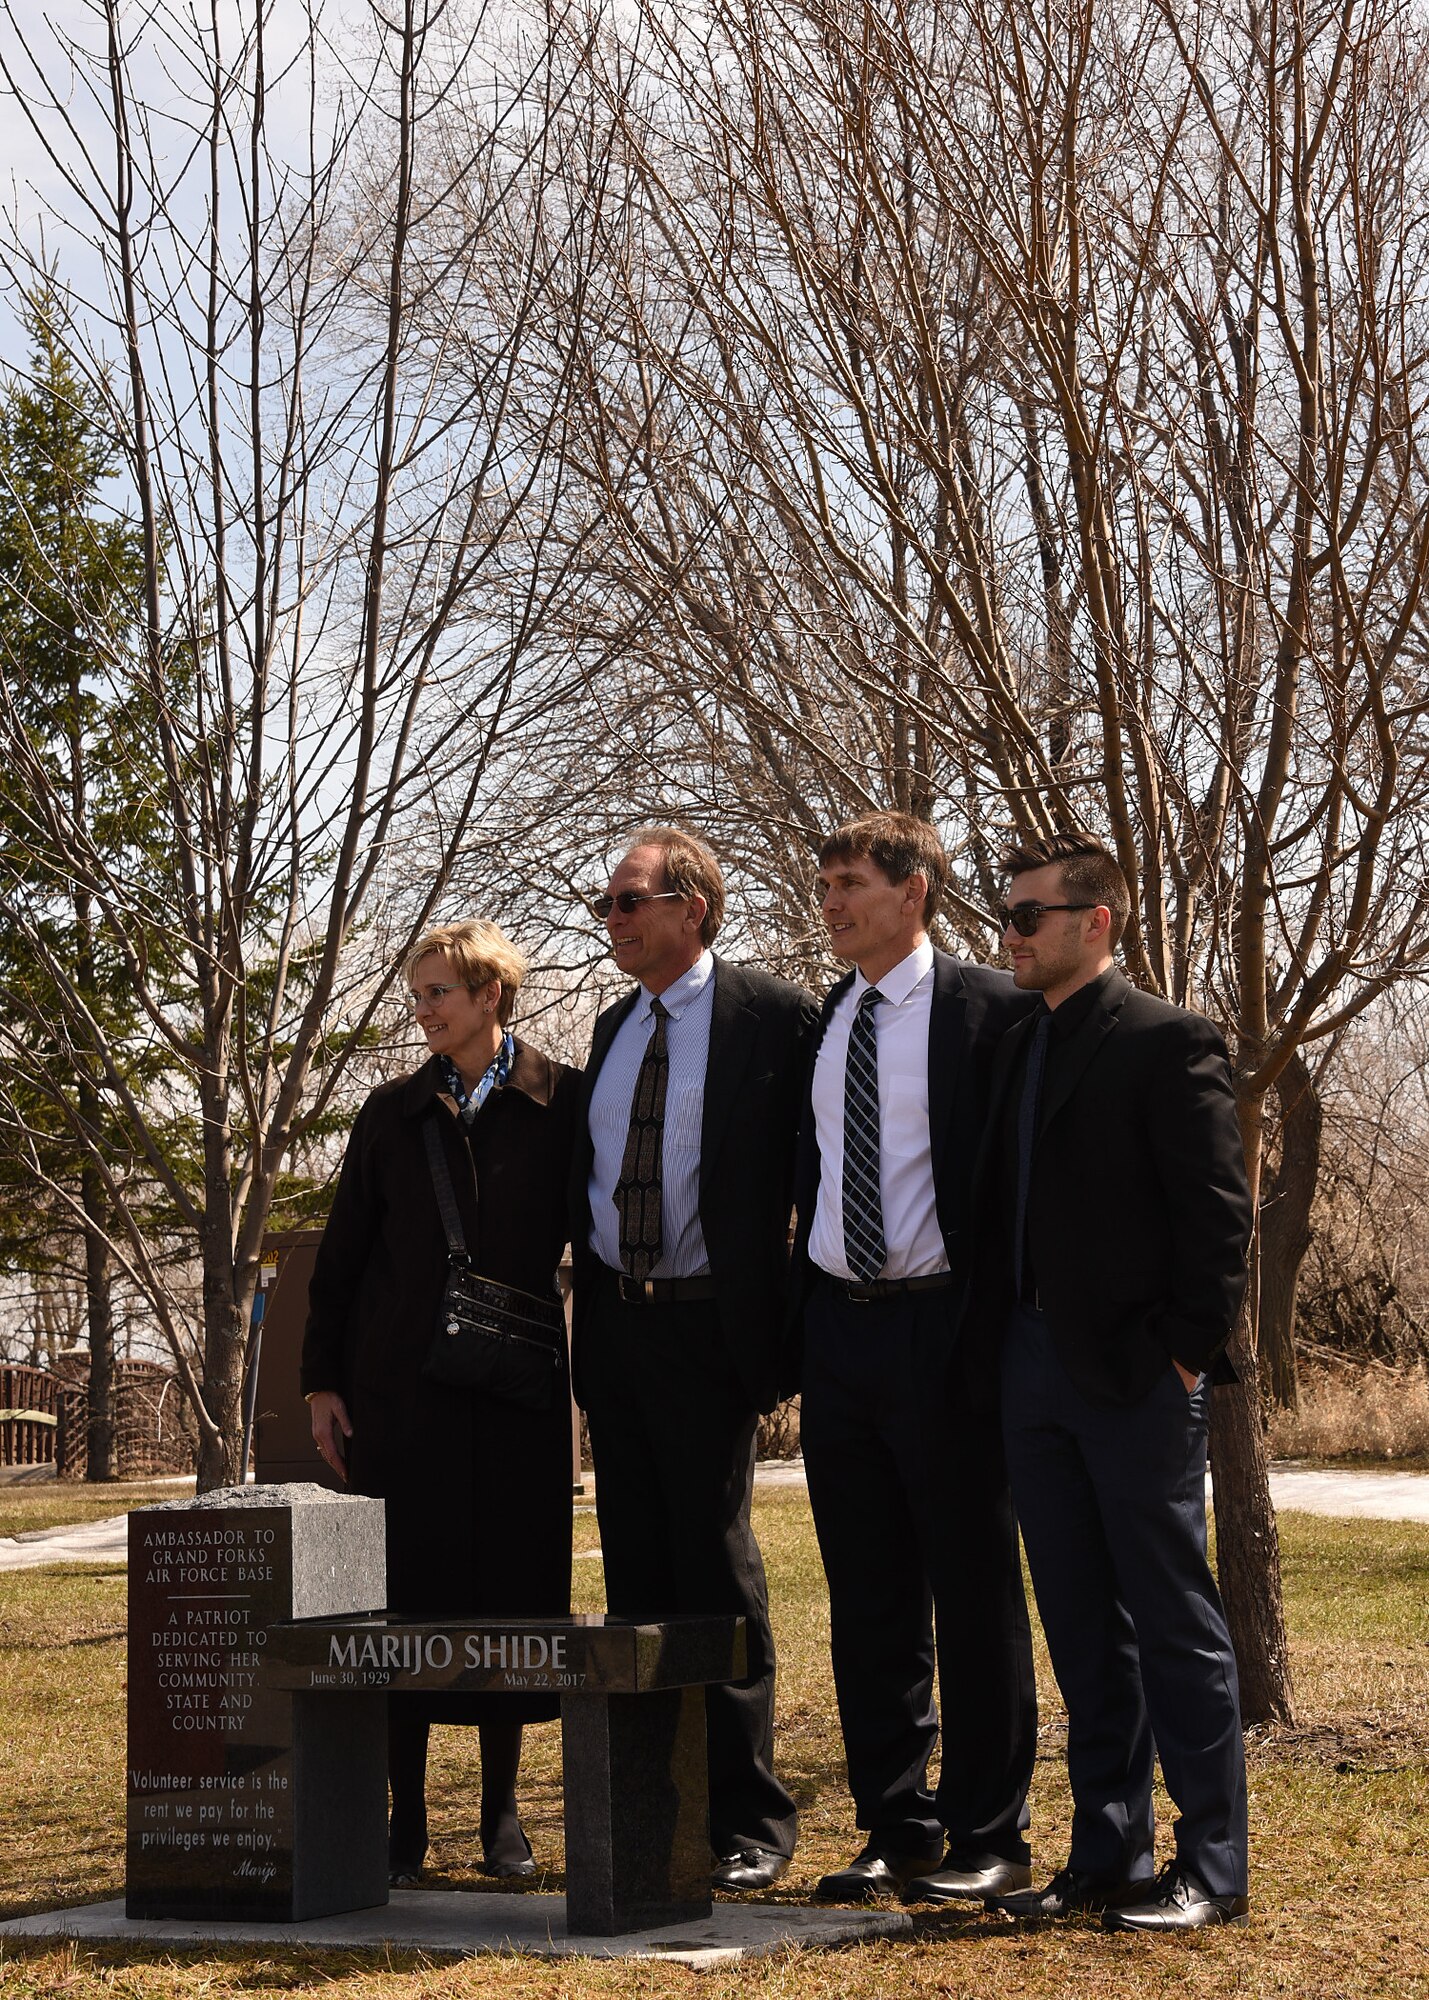 Members of Marijo Shide’s family pose for a photo behind a memorial in her honor, following the ceremony attended by more than 50 Airmen, ambassadors, friends and family members April 20, 2018, on Grand Forks Air Force Base, N.D. The dedicated bench stands near the Prisoners of War and Missing in Action Memorial Park, near the front gate of the base, and is open to the public. (Air Force photo by Airman 1st Class Elora J. Martinez)